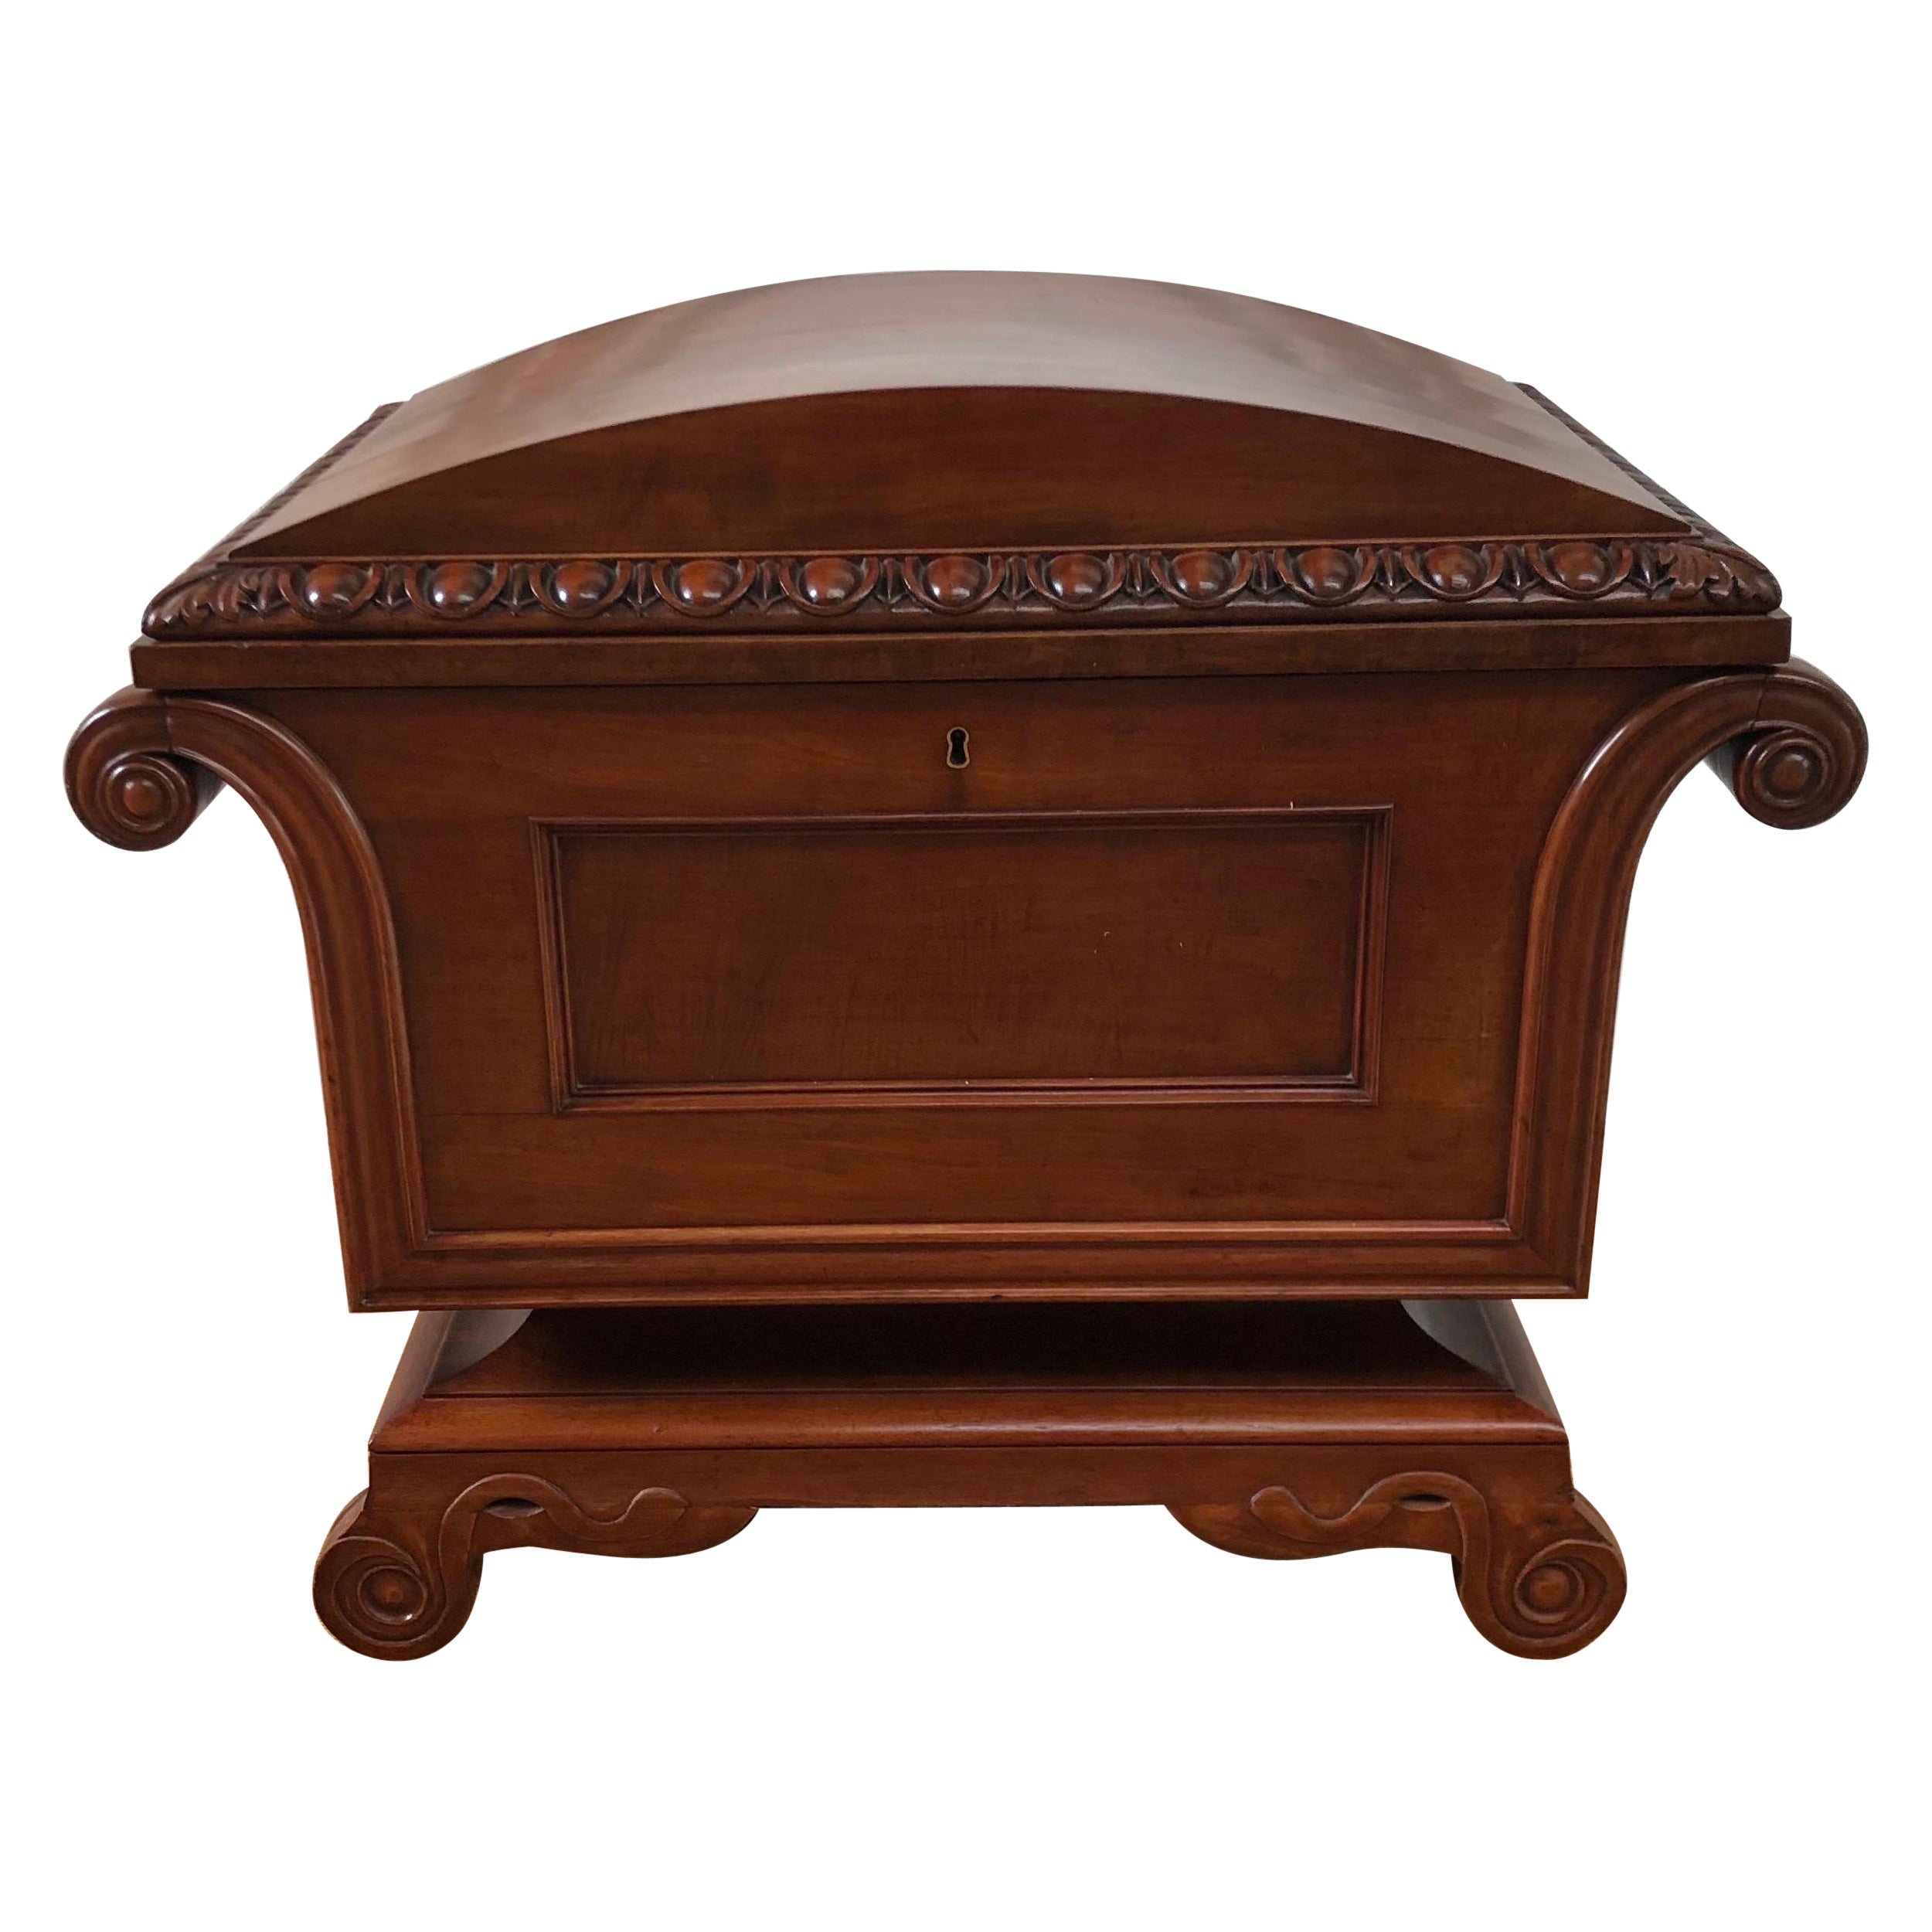 Classical English Regency Sarcophagus Mahogany Dome Top Cellarette / Office File